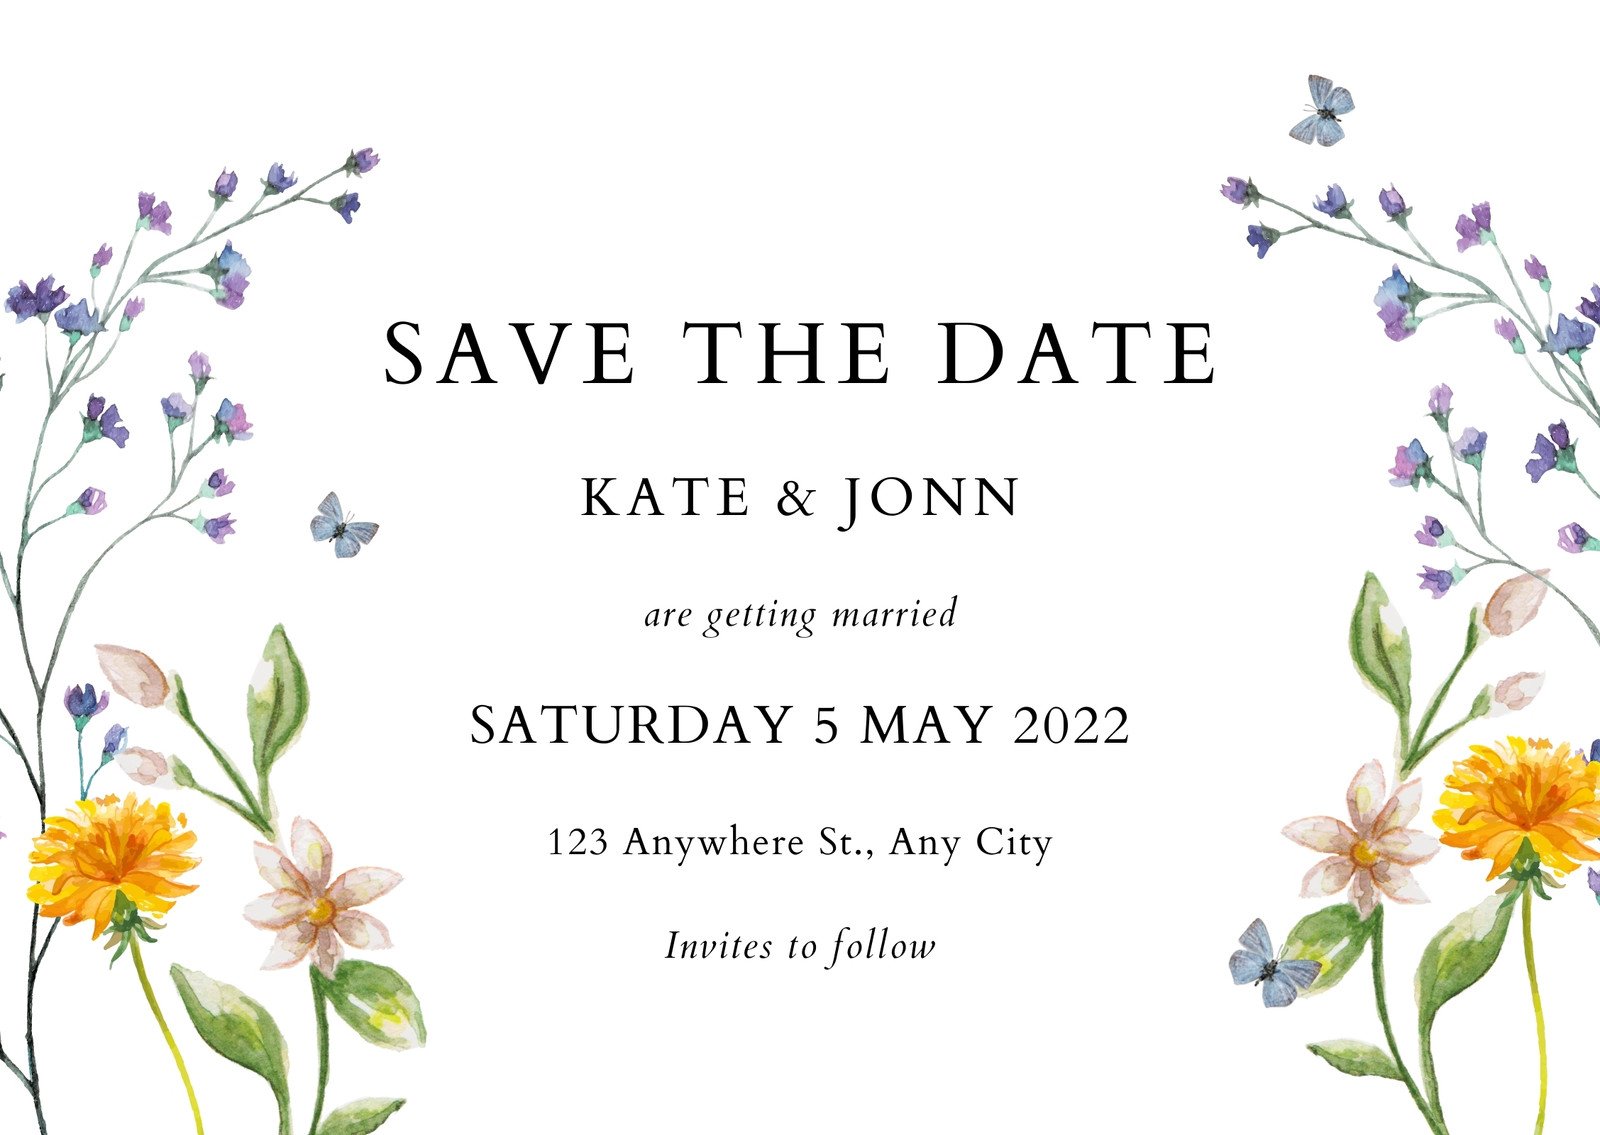 Make Your Own Save The Date Cards - Canva